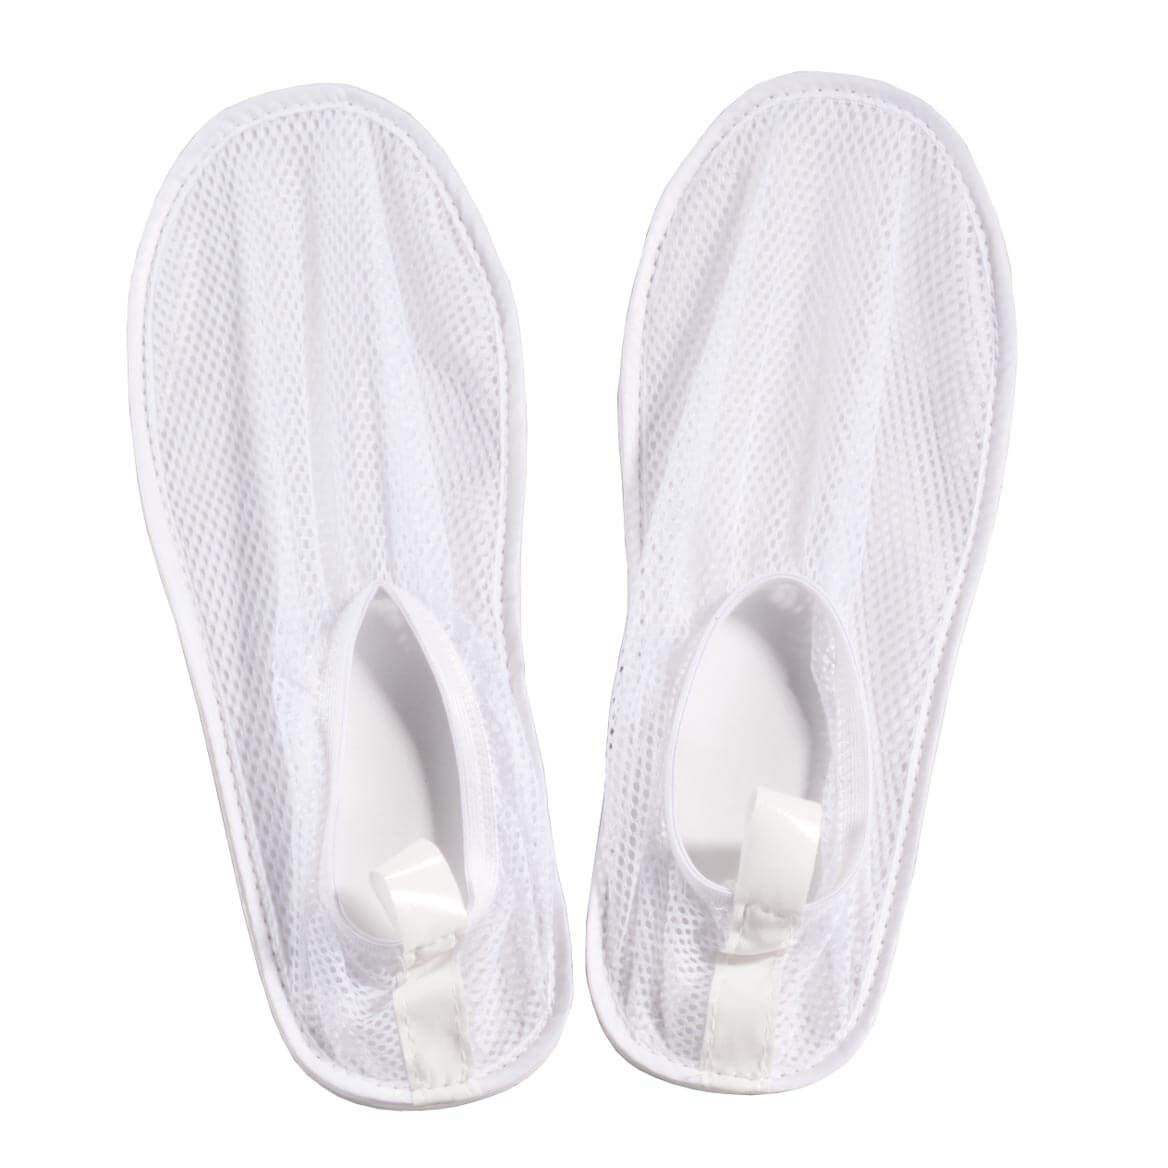 Bathroom Shower Slippers, Womens Bath Slippers Shower Shoes,Quick Drying  Non-Slip Slippers, Bathroom House & Pool Sandals, Soft Sole - Walmart.com | Shower  slippers, Shower shoes, Shower sandals